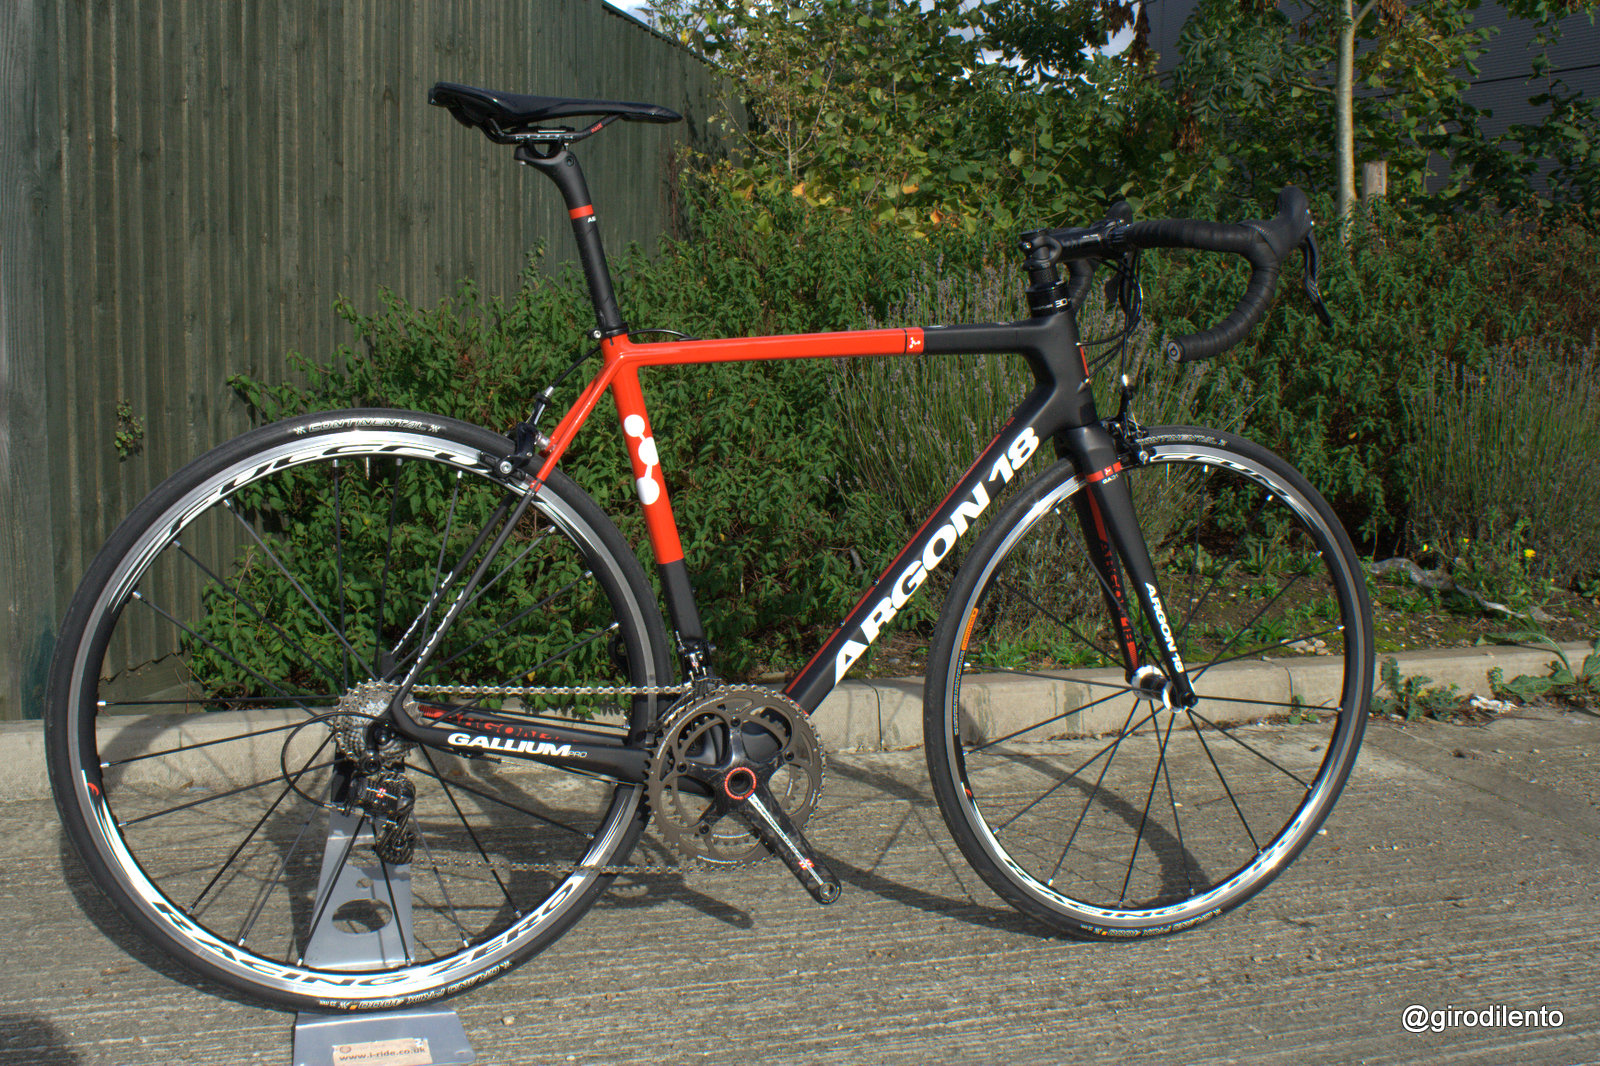 2014 Argon 18 Gallium Pro - first impressions were very positive indeed. A lovely bike